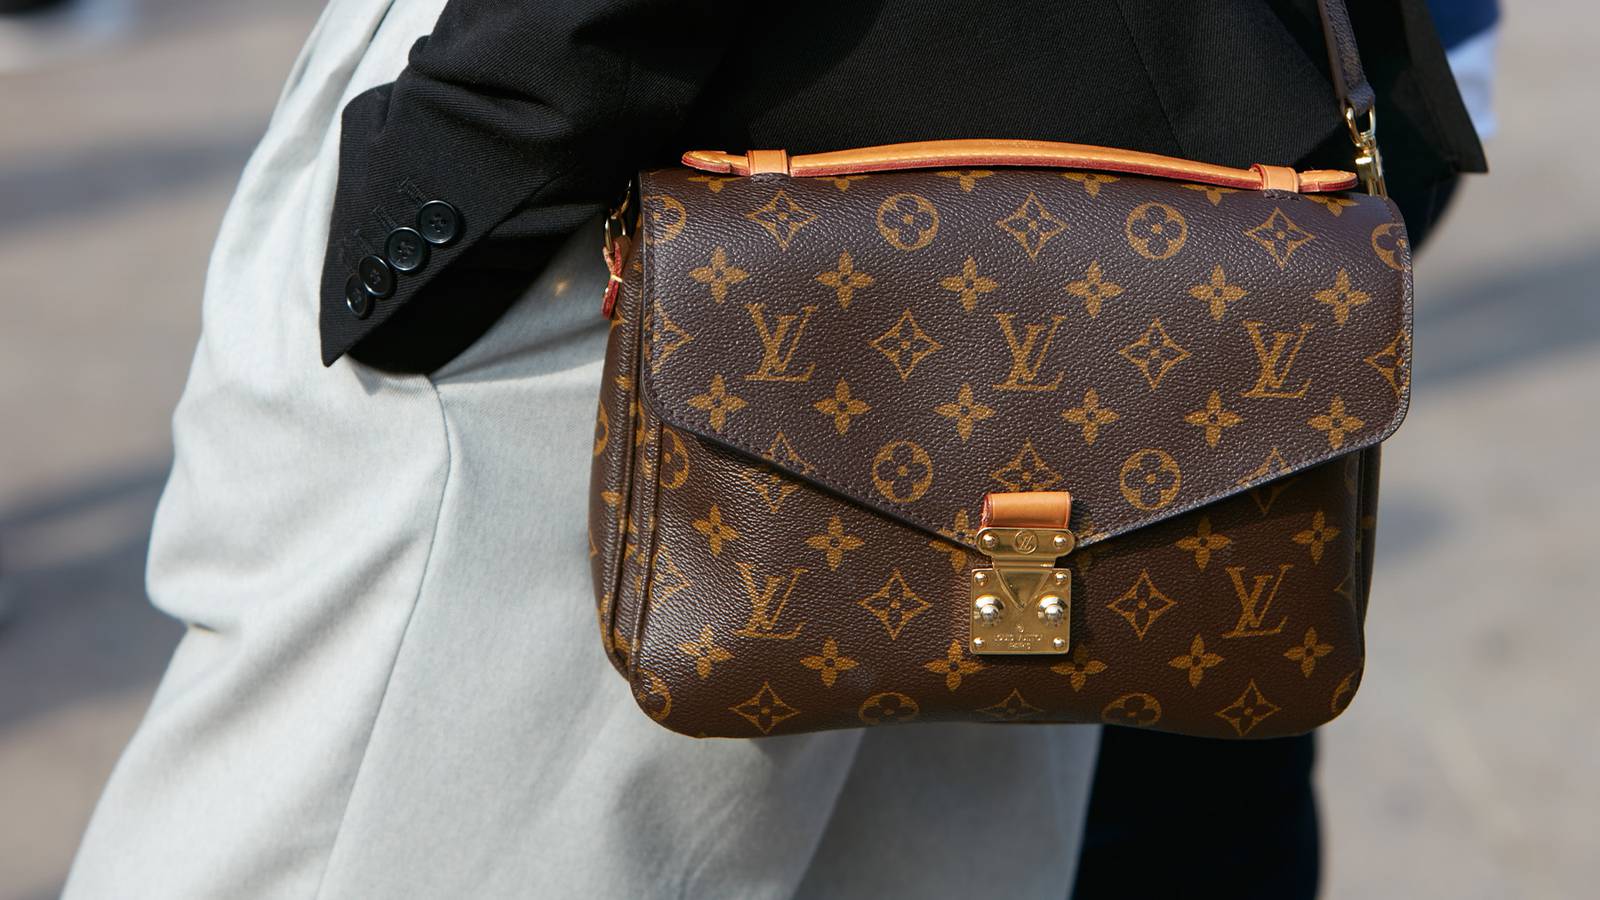 Watch LVMH's Sales Growth Slows as Global Luxury Demand Cools - Bloomberg